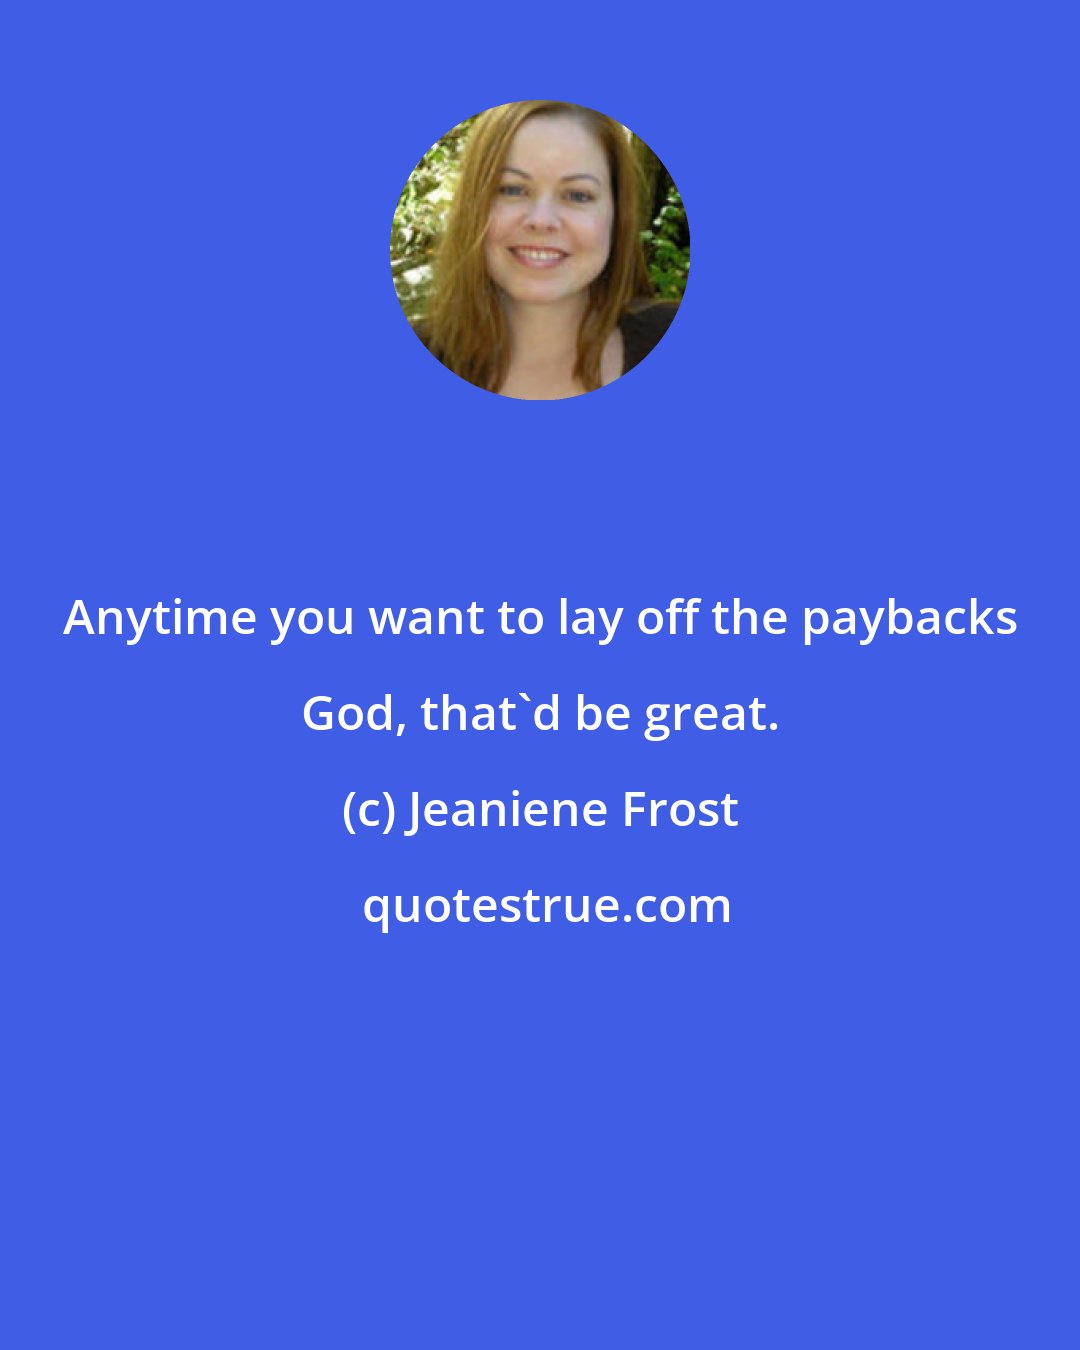 Jeaniene Frost: Anytime you want to lay off the paybacks God, that'd be great.